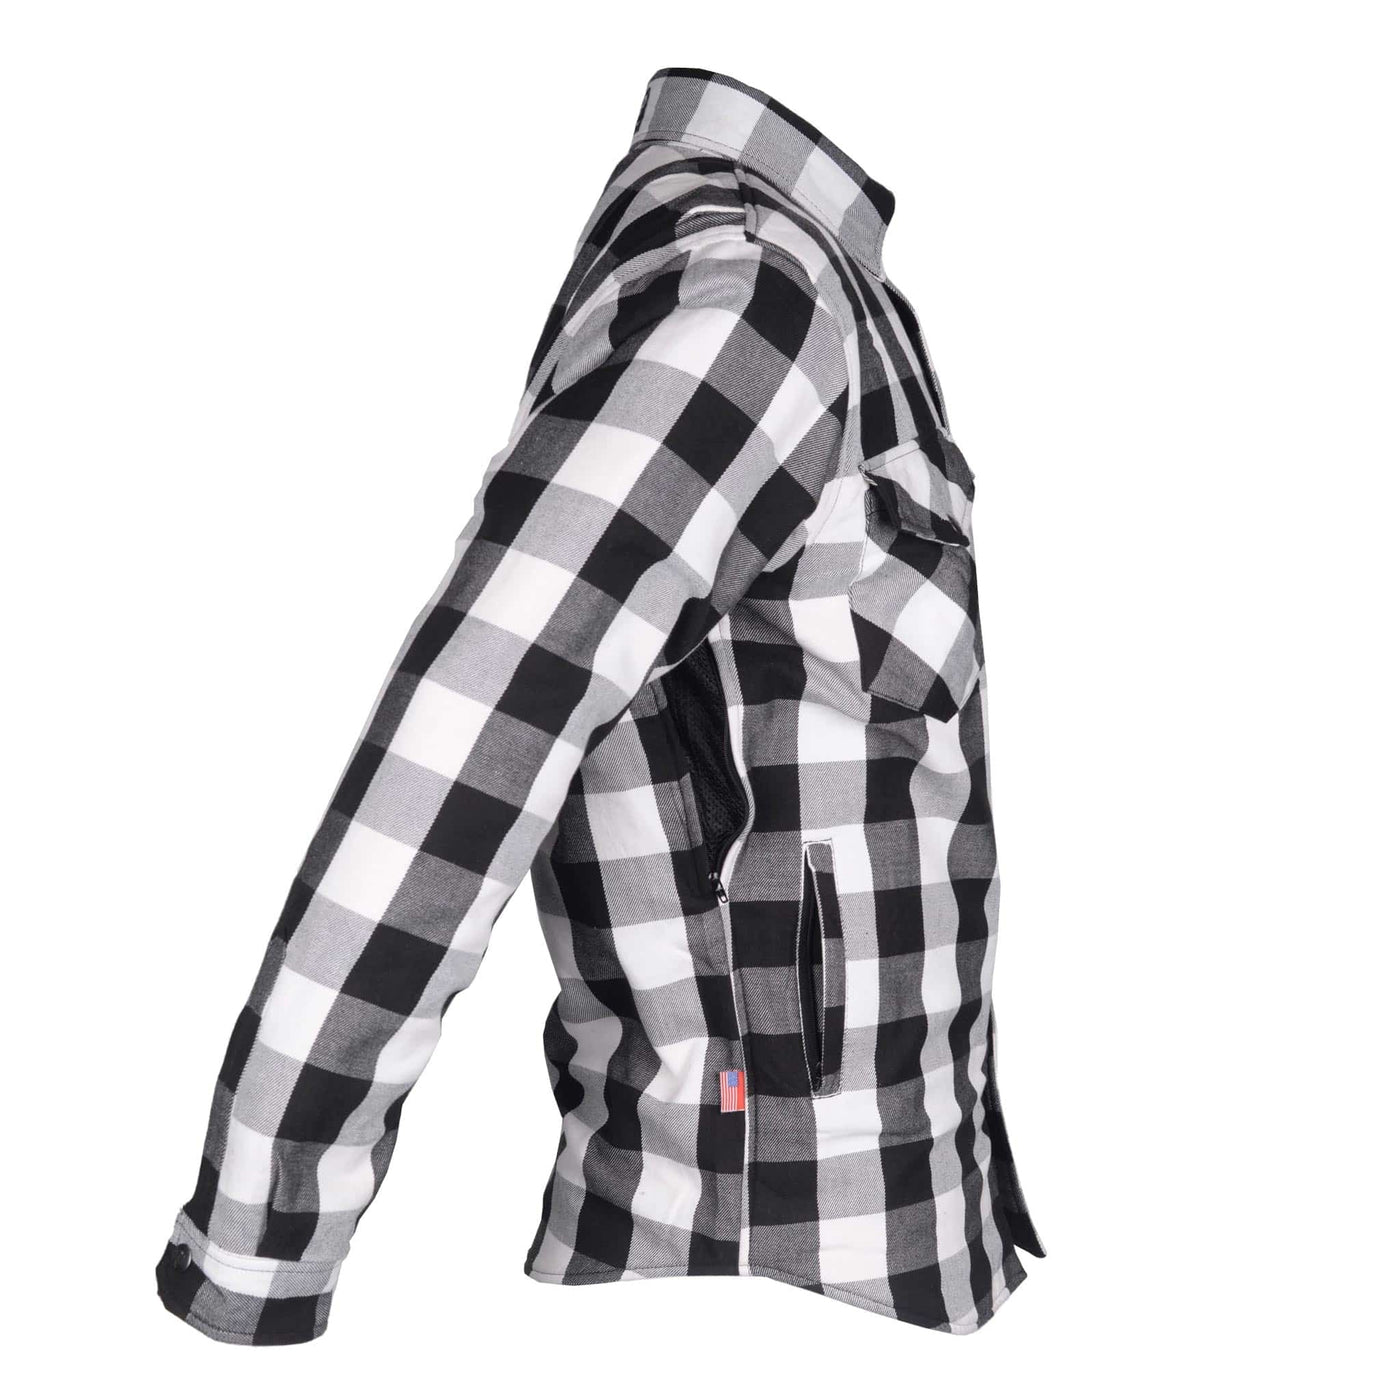 Protective Flannel Shirt with Pads "Midnight Ride" - Black and White Checkered